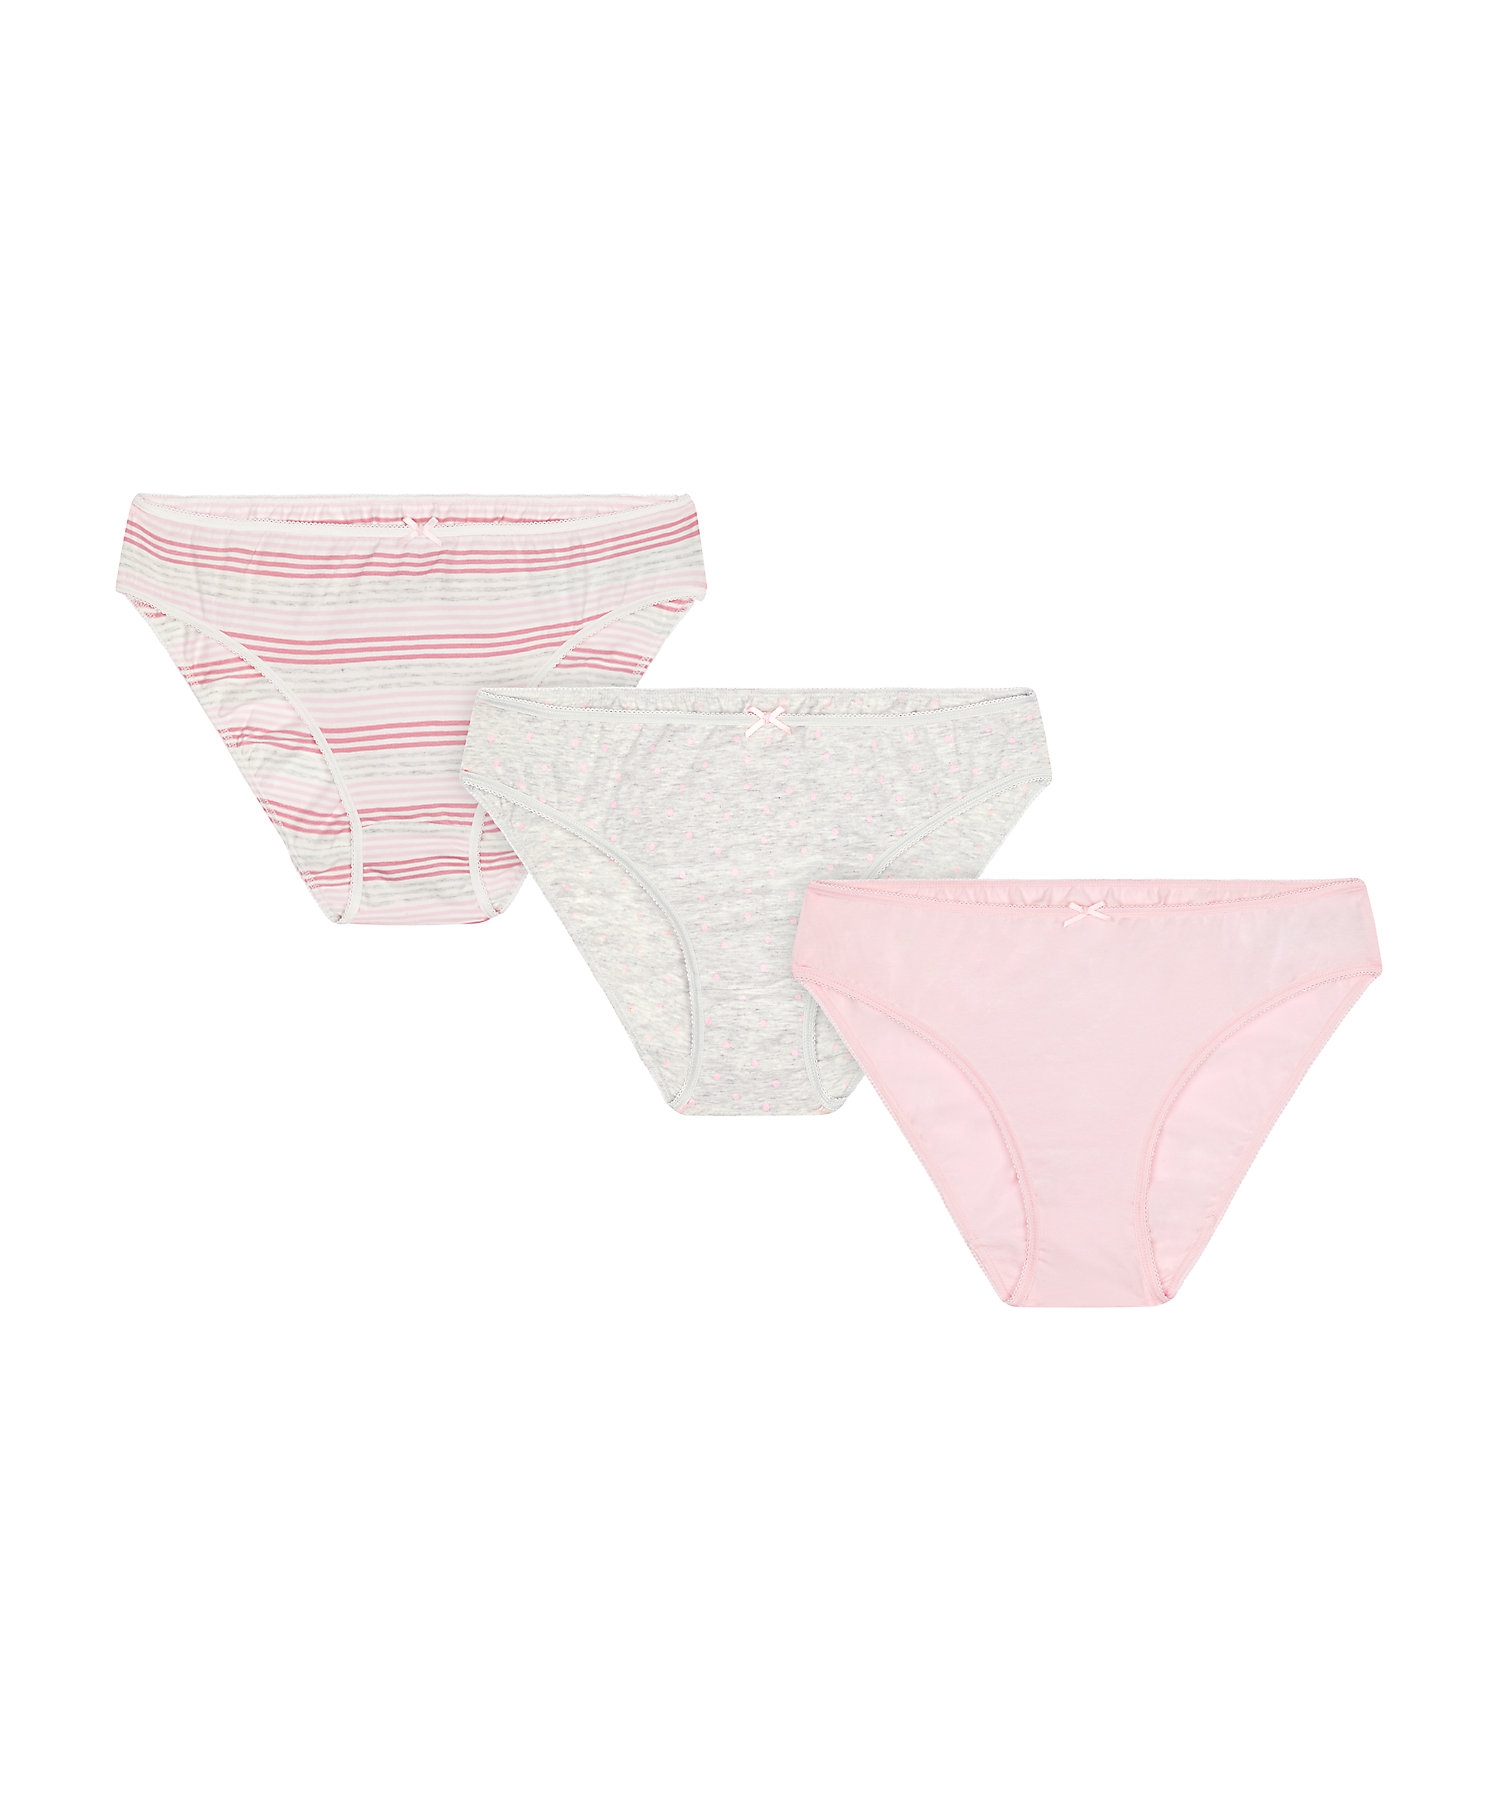 Women Maternity Briefs Striped - Pack Of 3 - Multicolor